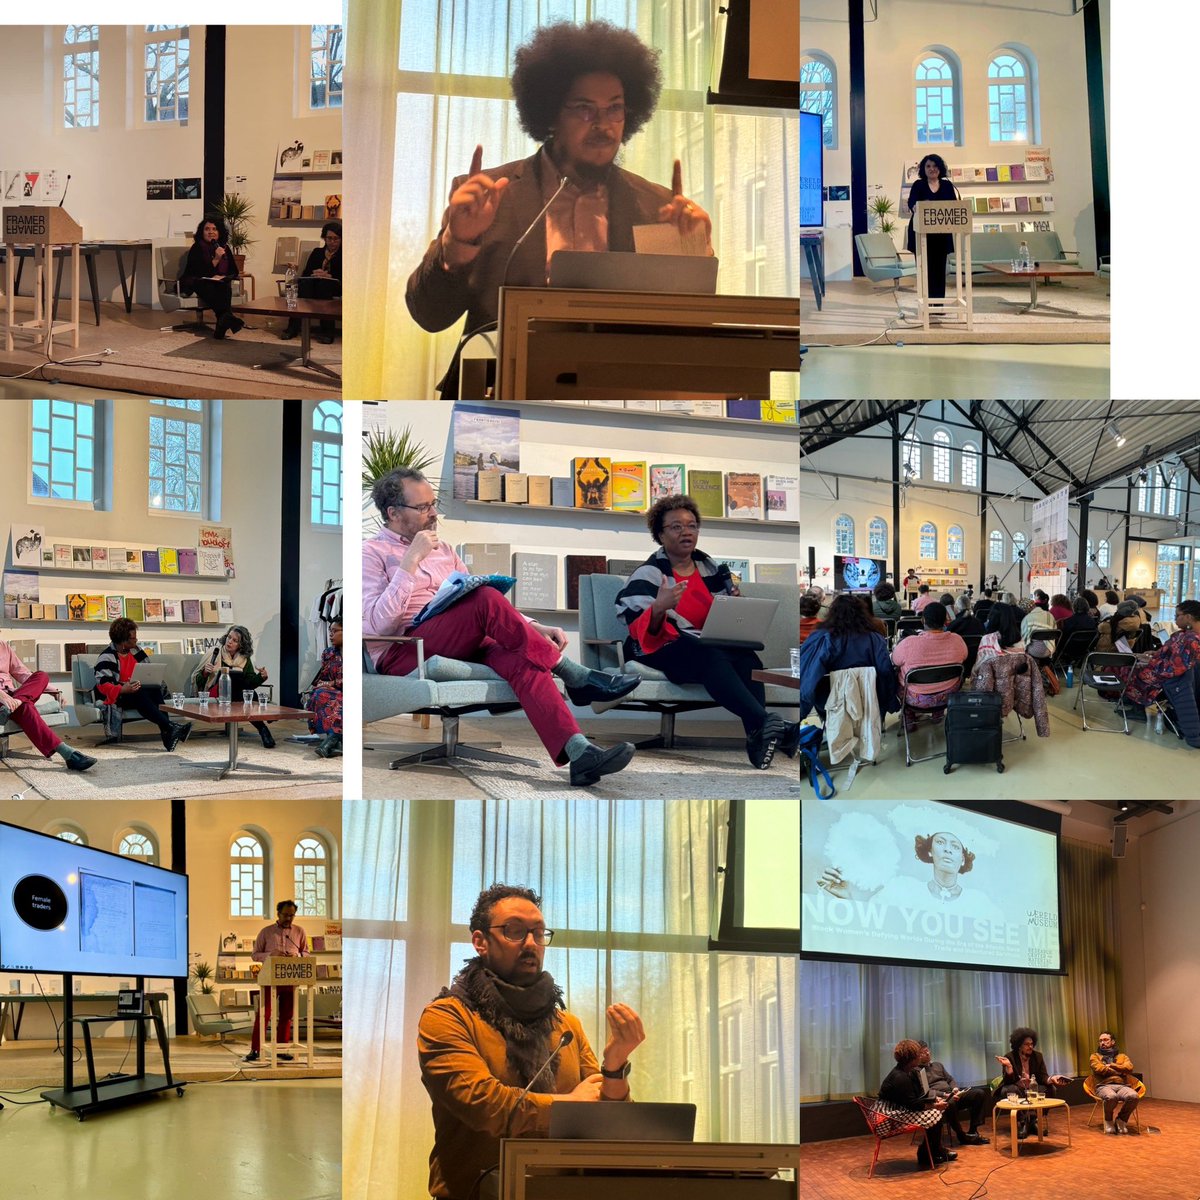 A big thanks to dear speakers and attendants of the international conference Now You See: Black Women’s Defying Worlds During the Era of the Atlantic Slave Trade and Indentured Servitude convened by me and Carine Zaayman, sponsored by the @WM_Amsterdam and held also @FramerFramed